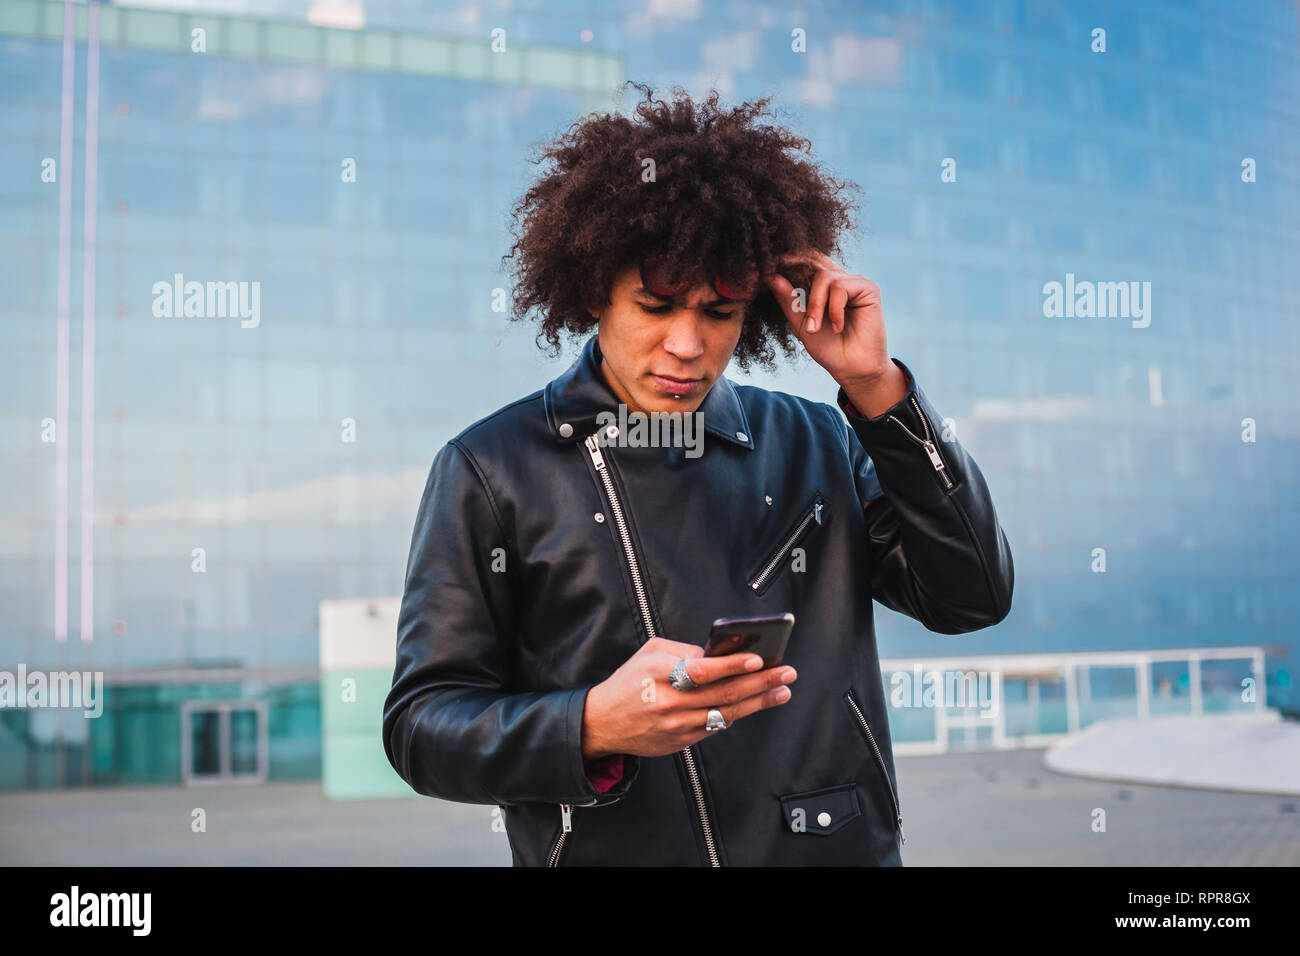 Stylish young man with afro hairstyle messaging with a smart phone in urban modern background, concept communication Stock Photo